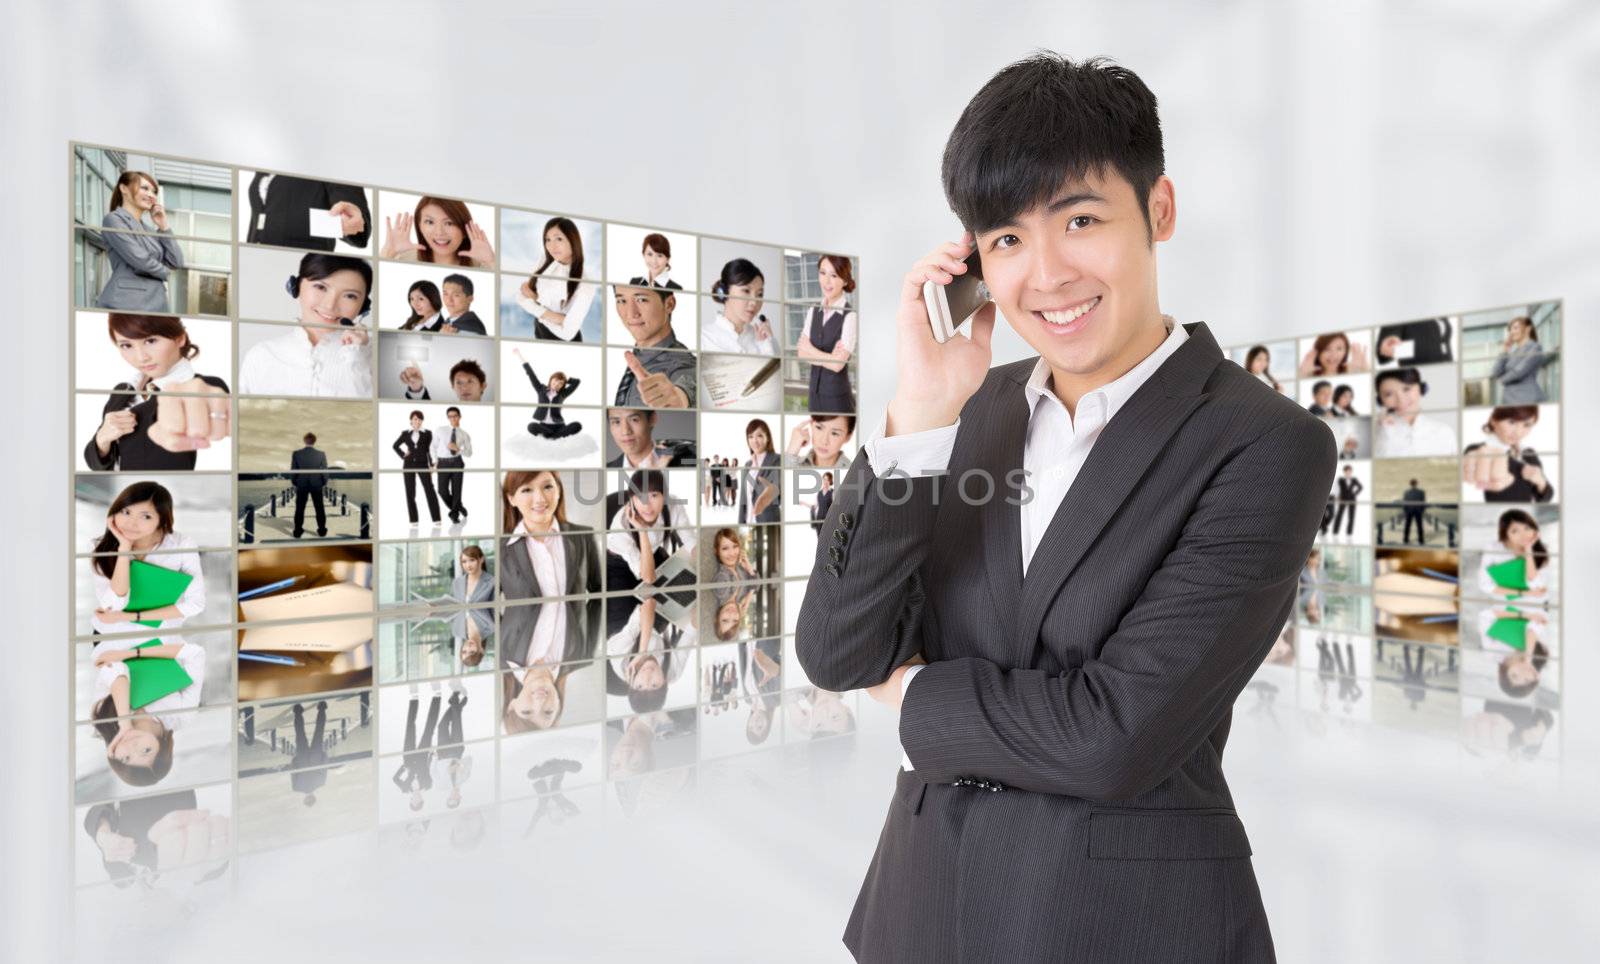 Young businessman talk on phone and stand in front of tv screen wall showing pictures of business concept by Asian business people. Concepts about business, communication, teamwork or social network.